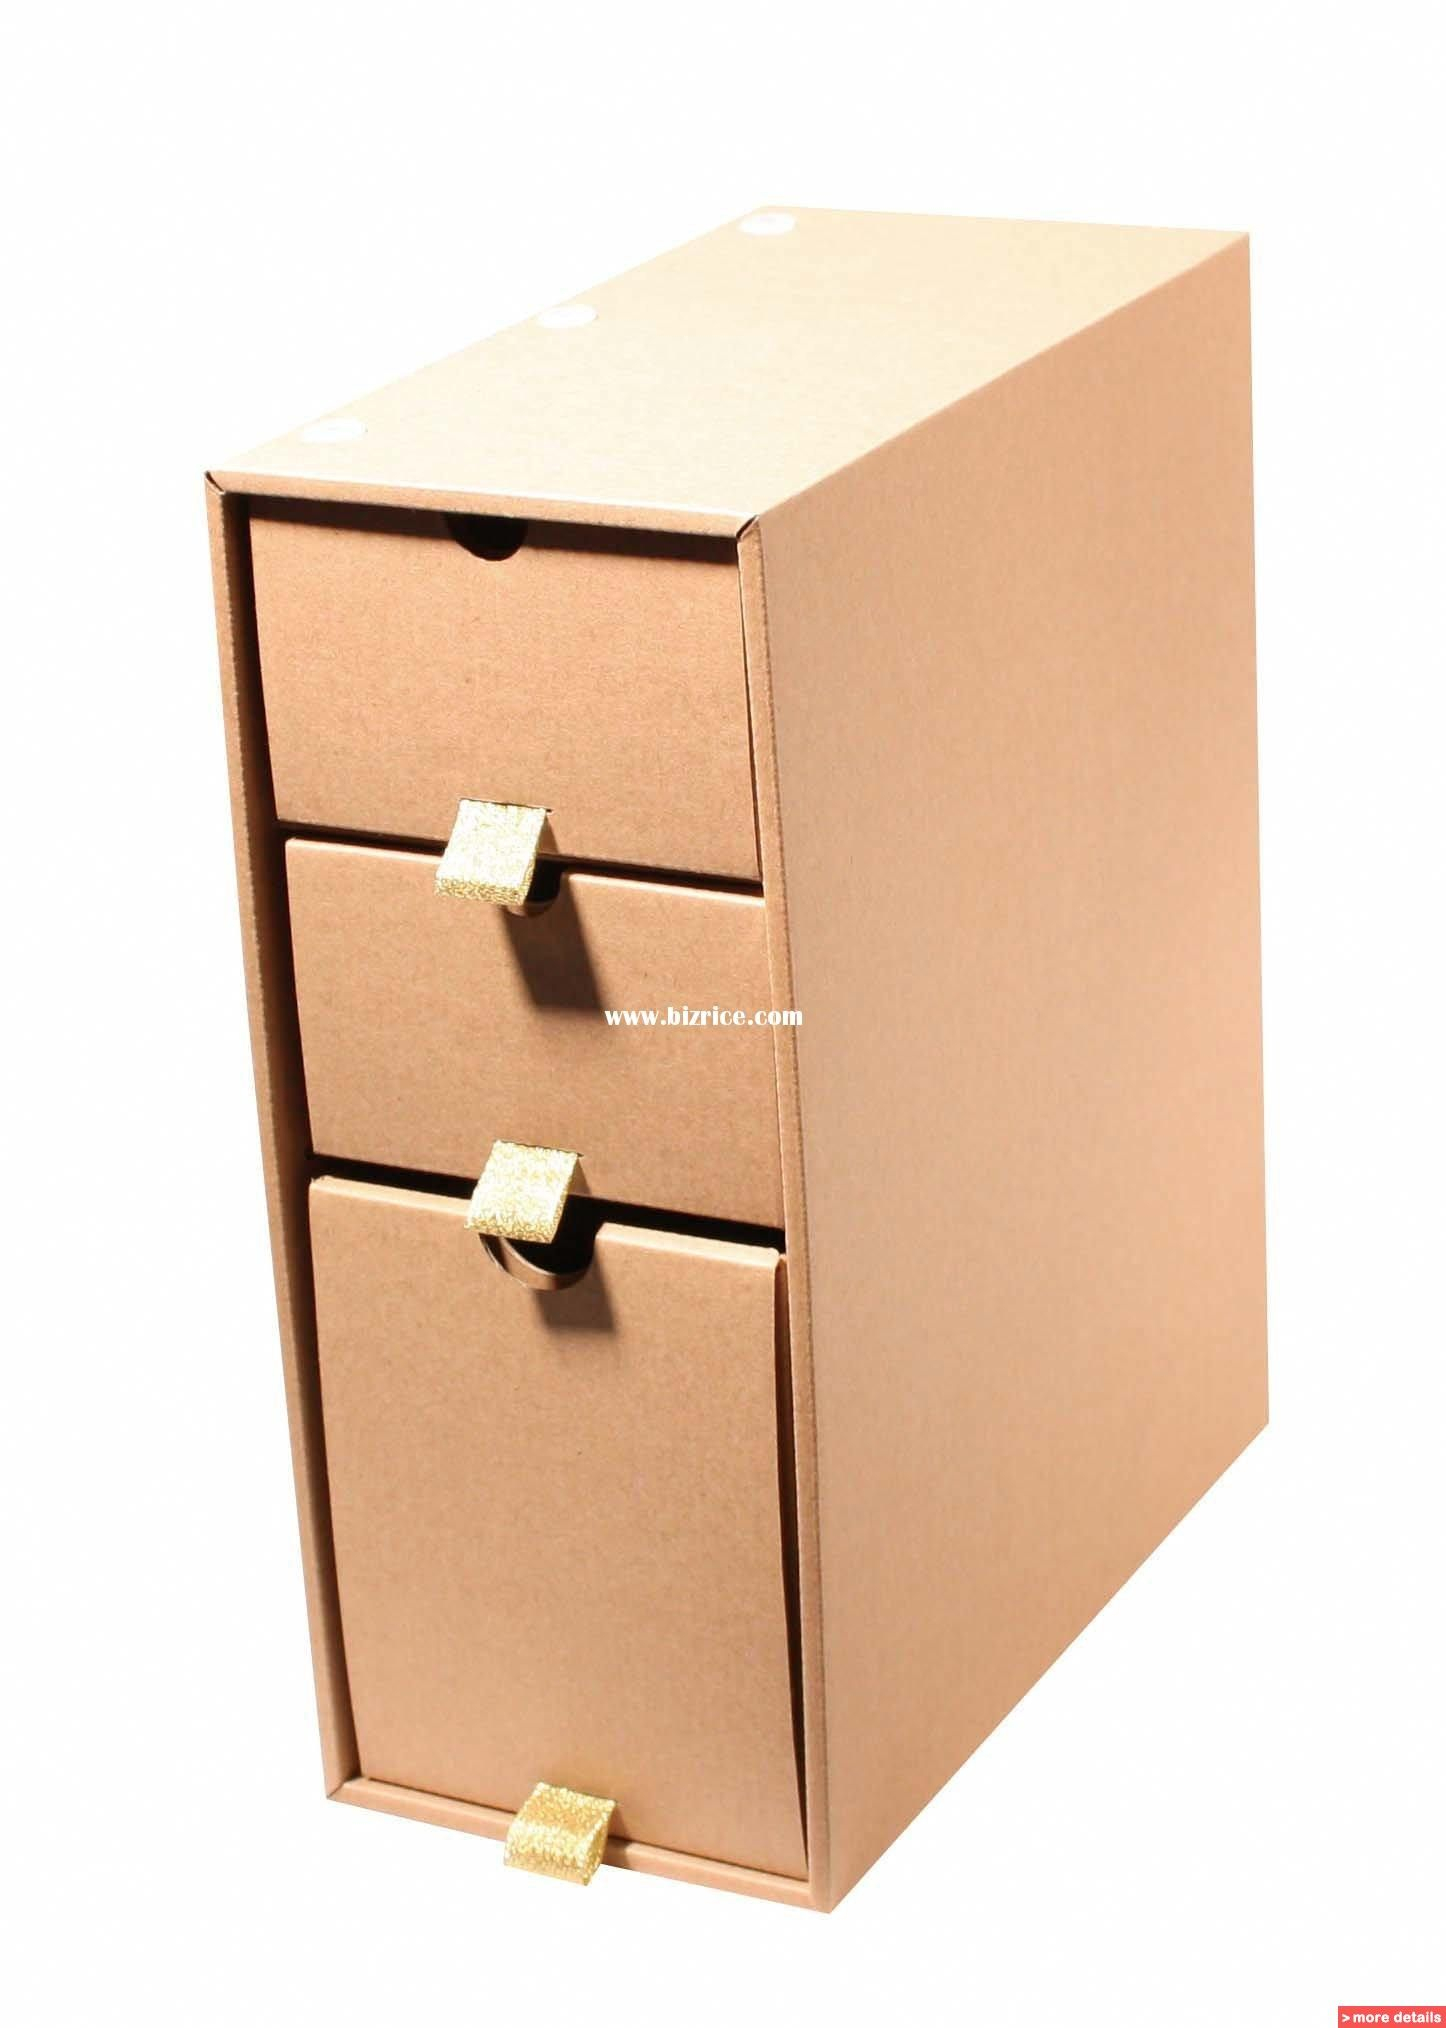 Desk Organizers To Make From Cardboard Boxes Desk Organizer Made within dimensions 1446 X 2028